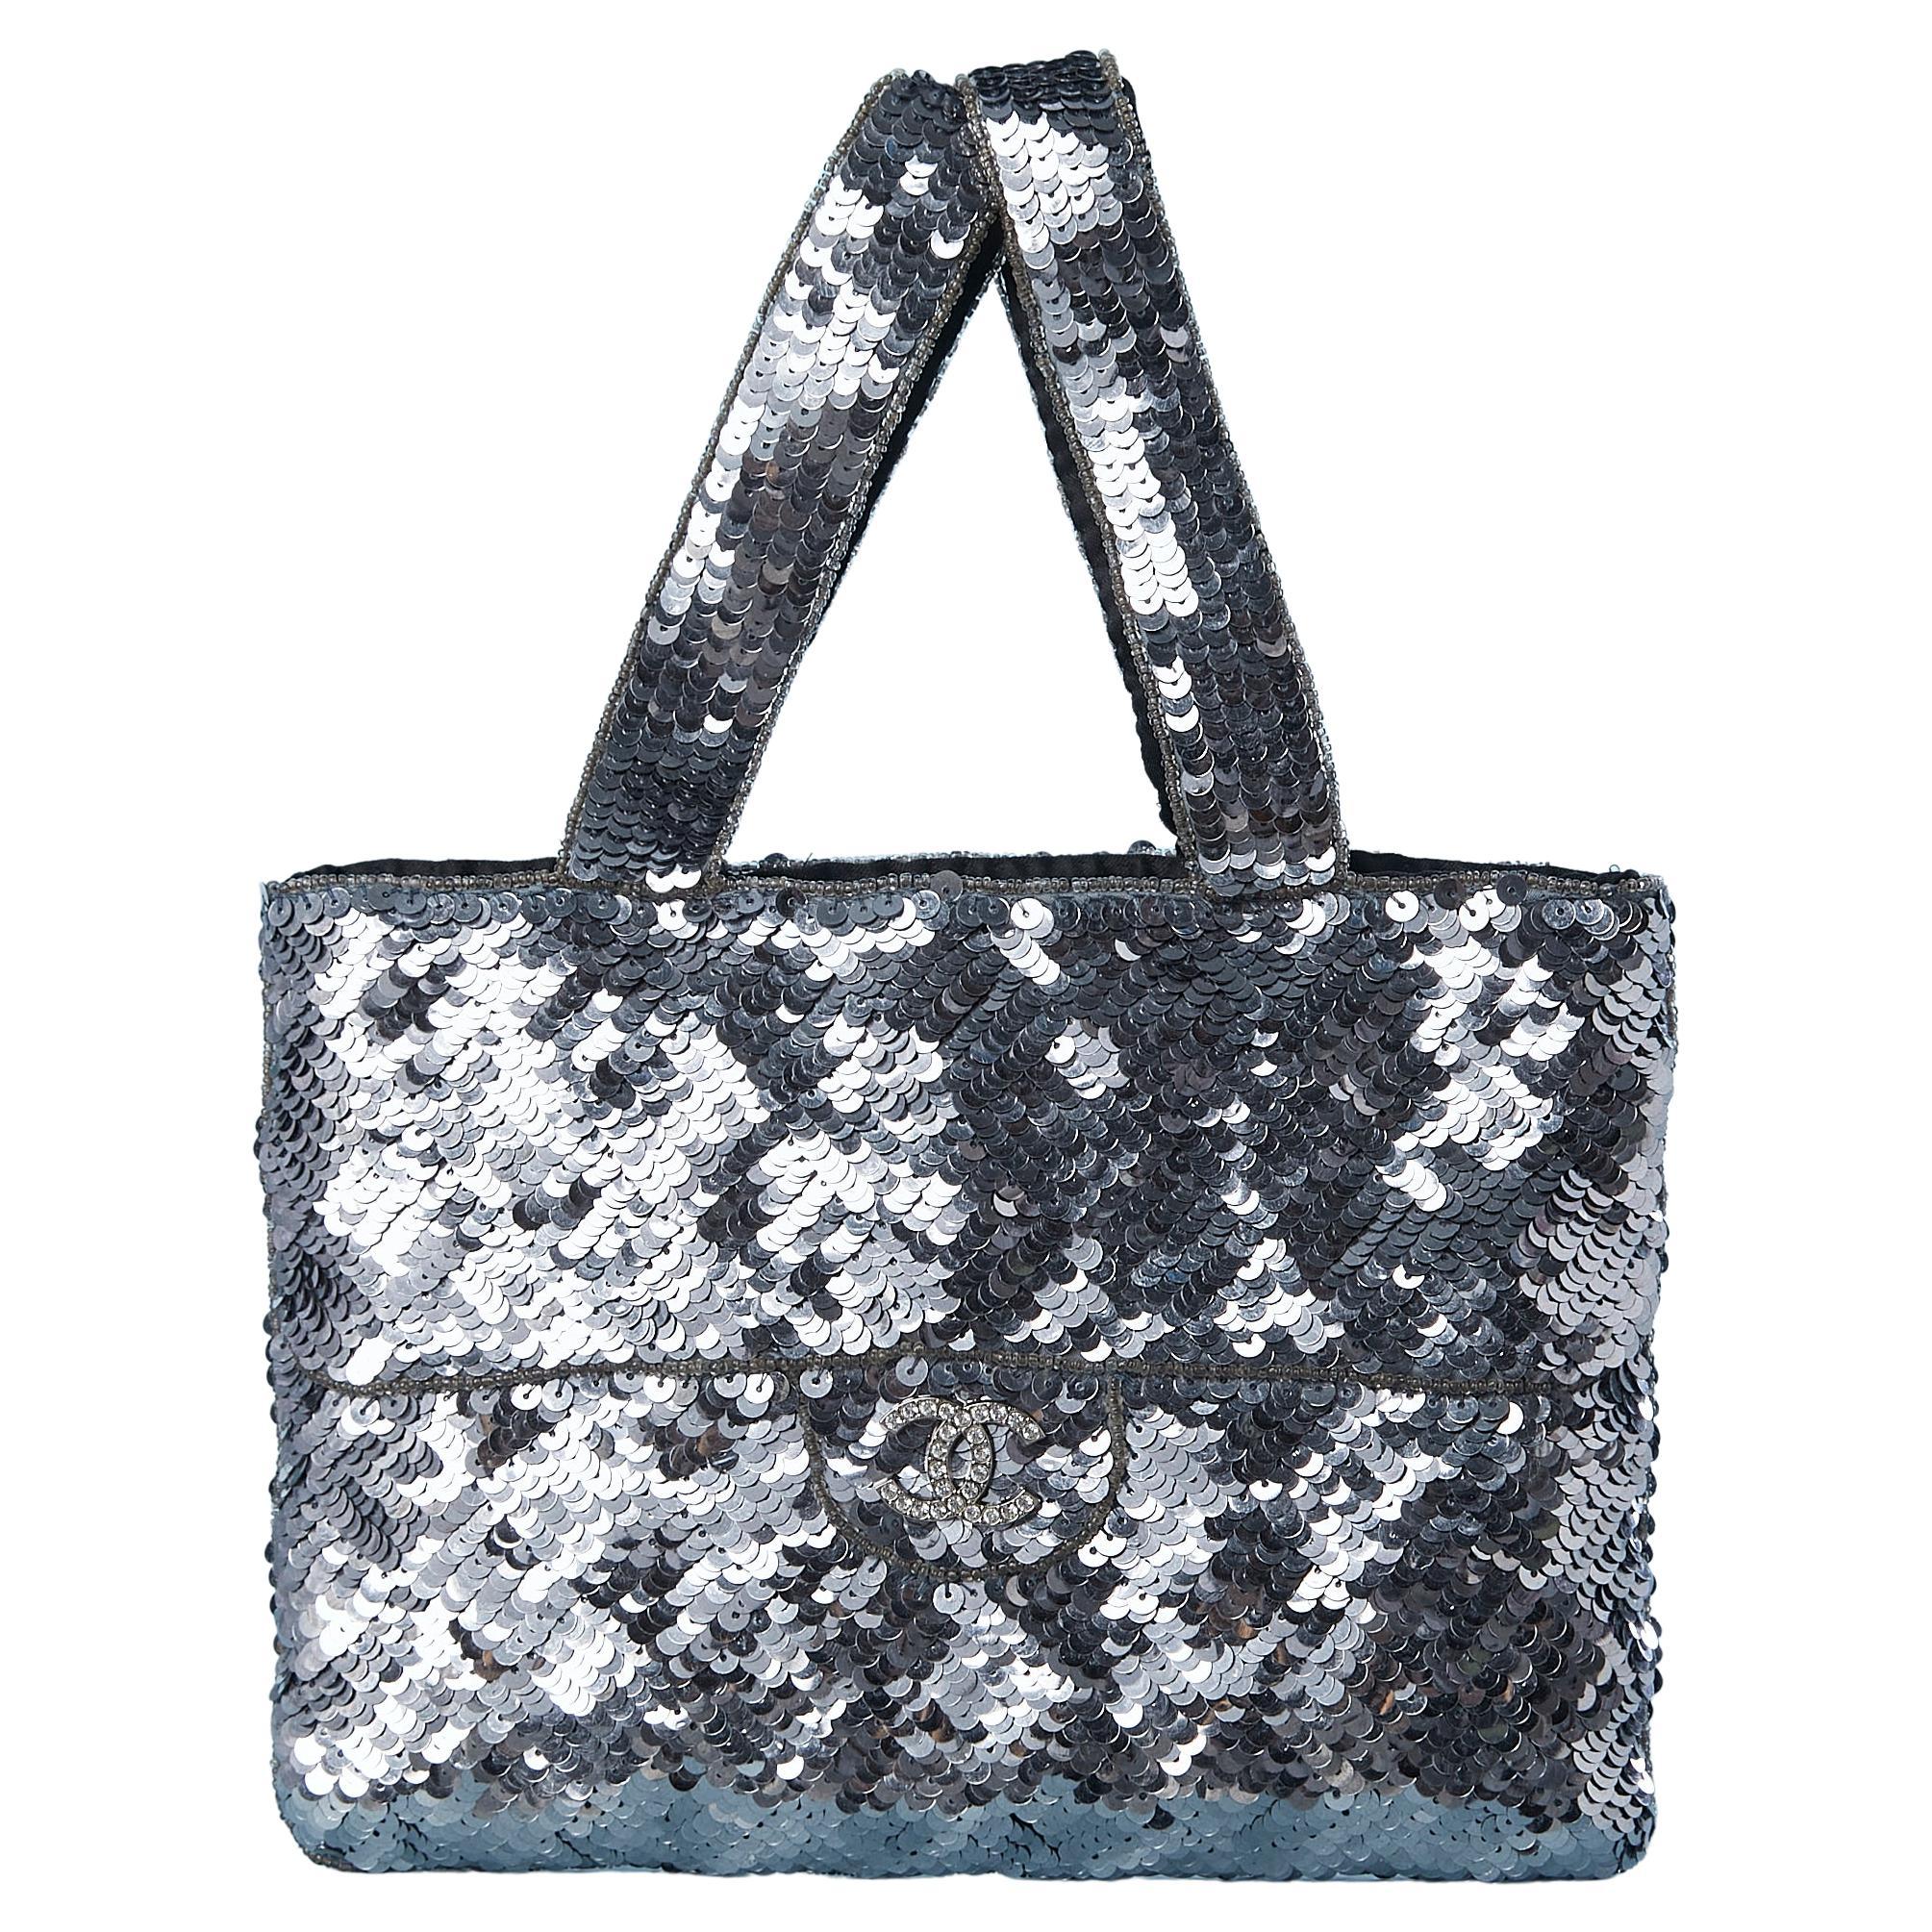 Evening bag in silver sequin, beads and rhinestone brand Chanel (Numbered )